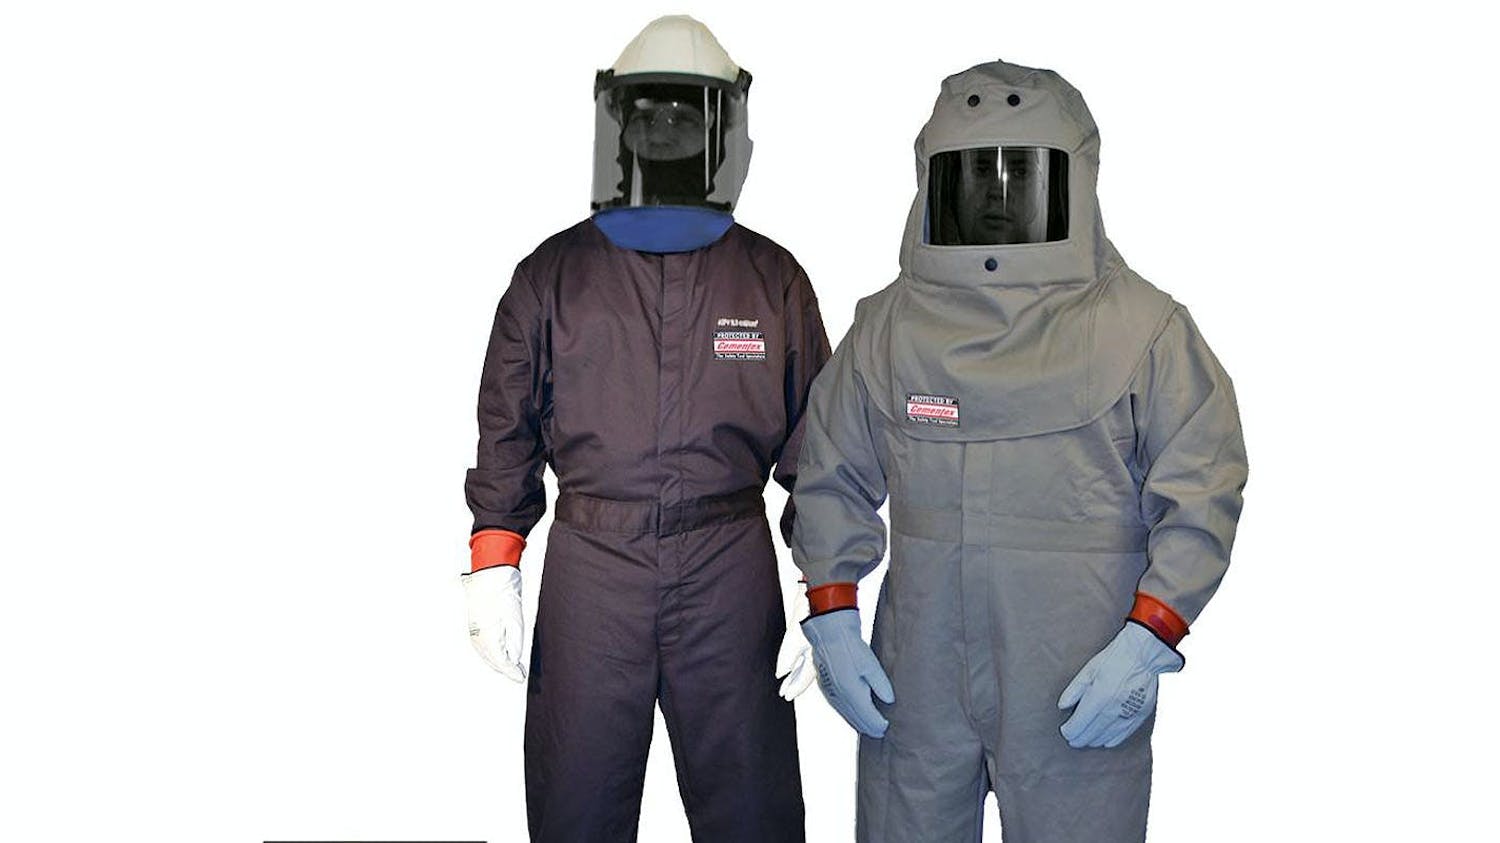 Cementex Contractor Series clothing for arc-flash protection.